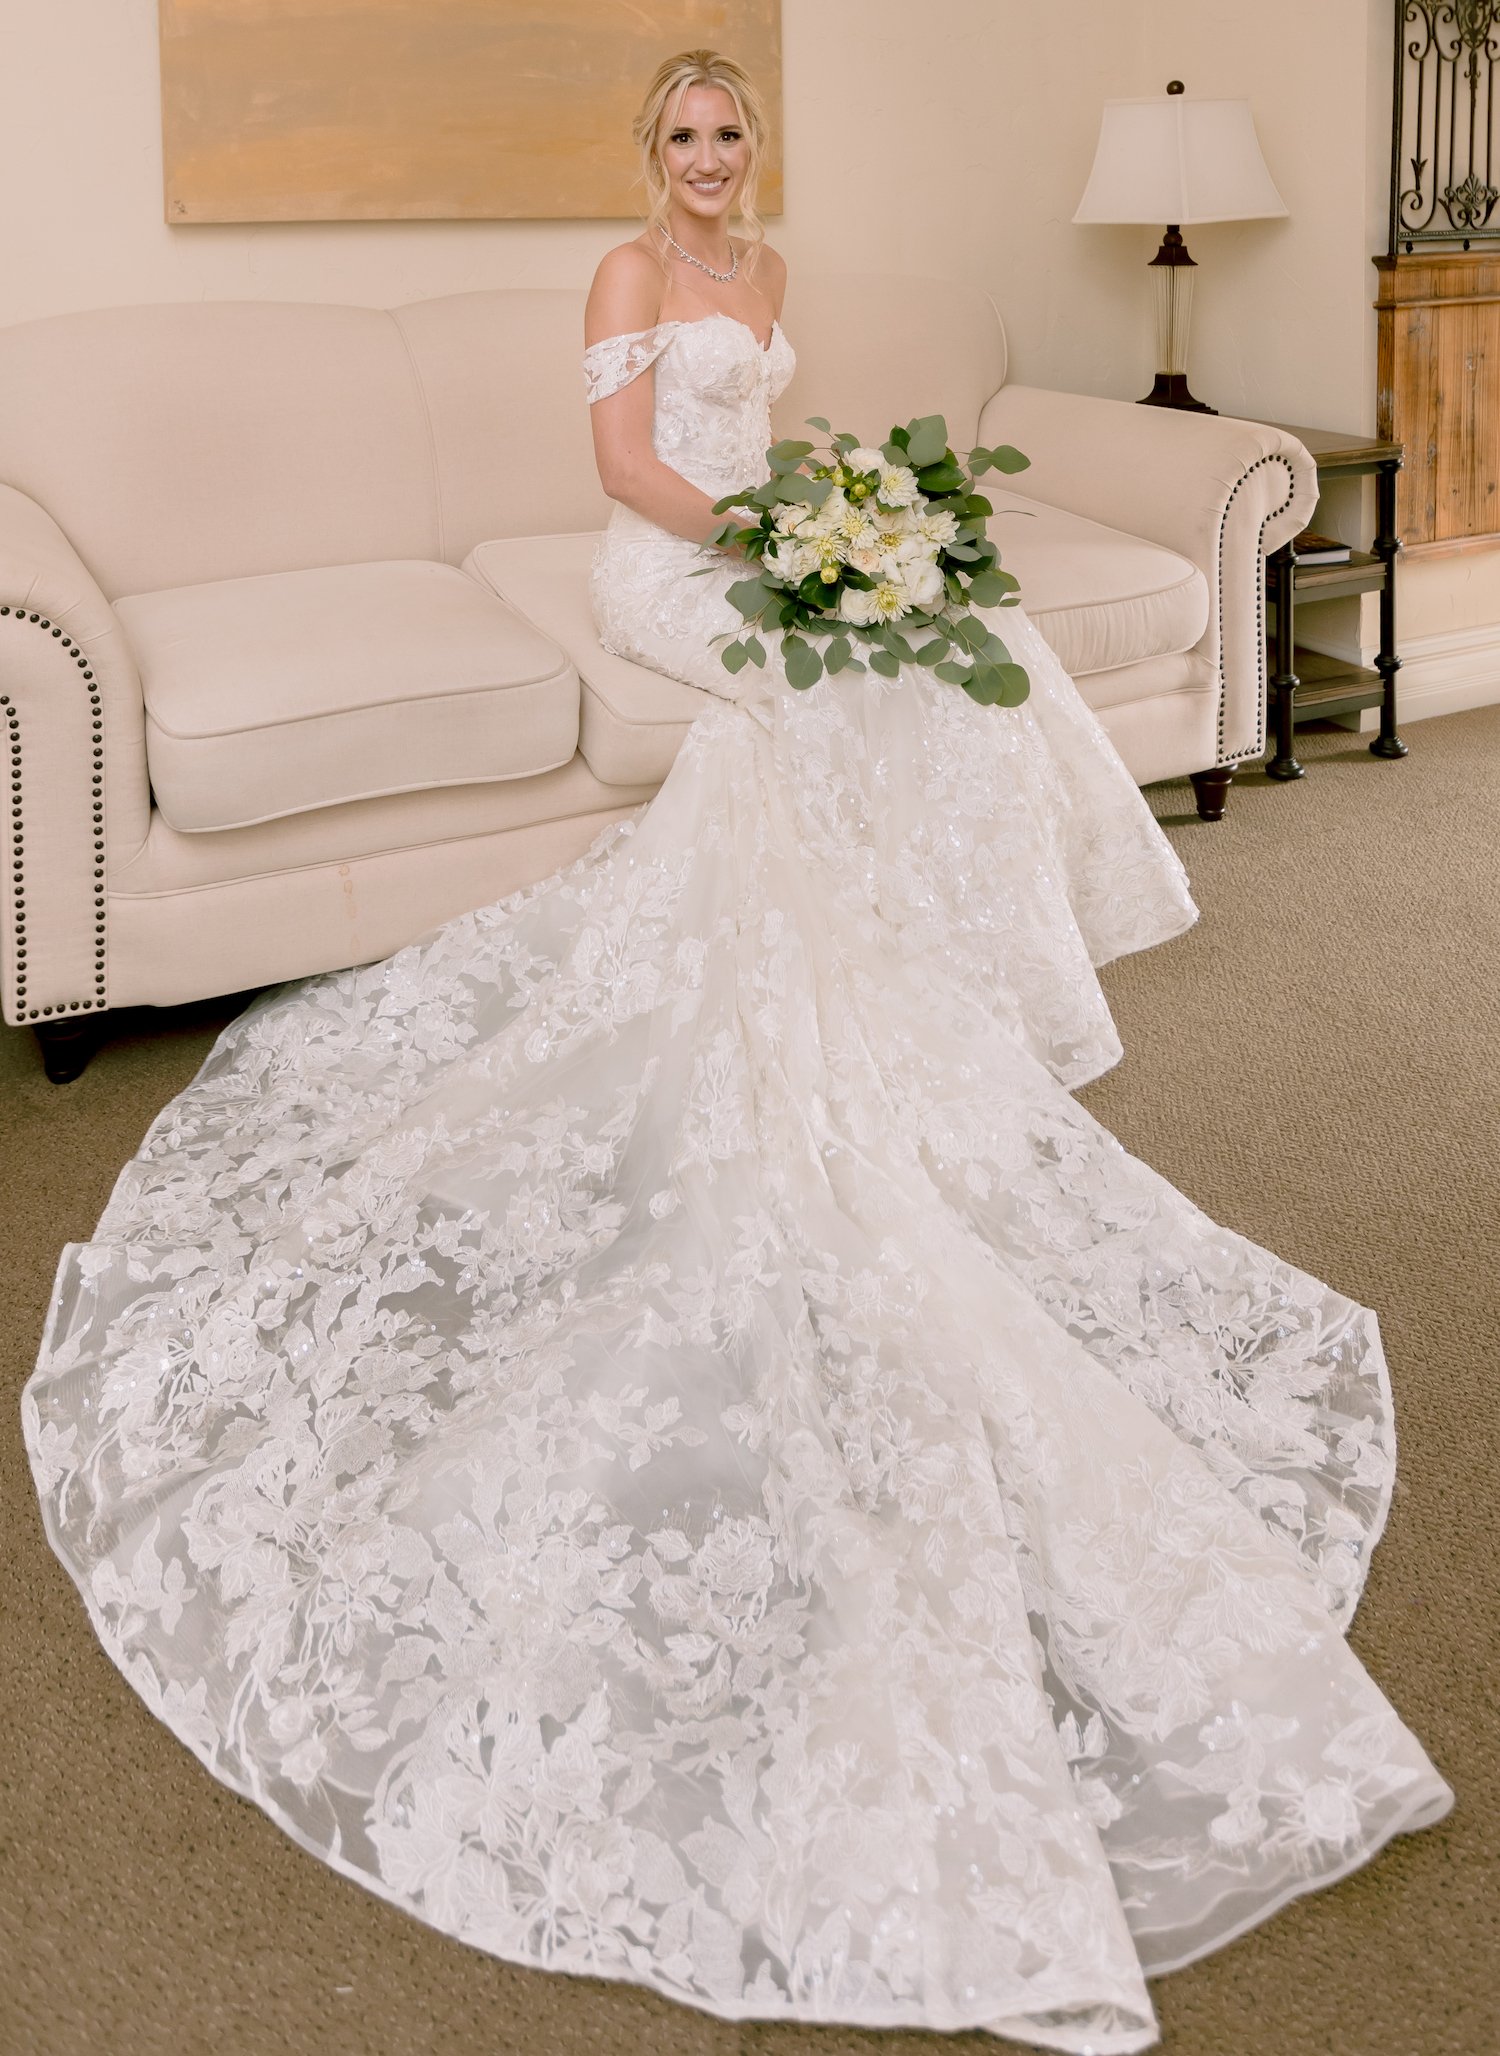 The bride is in her wedding dress sitting on a couch.